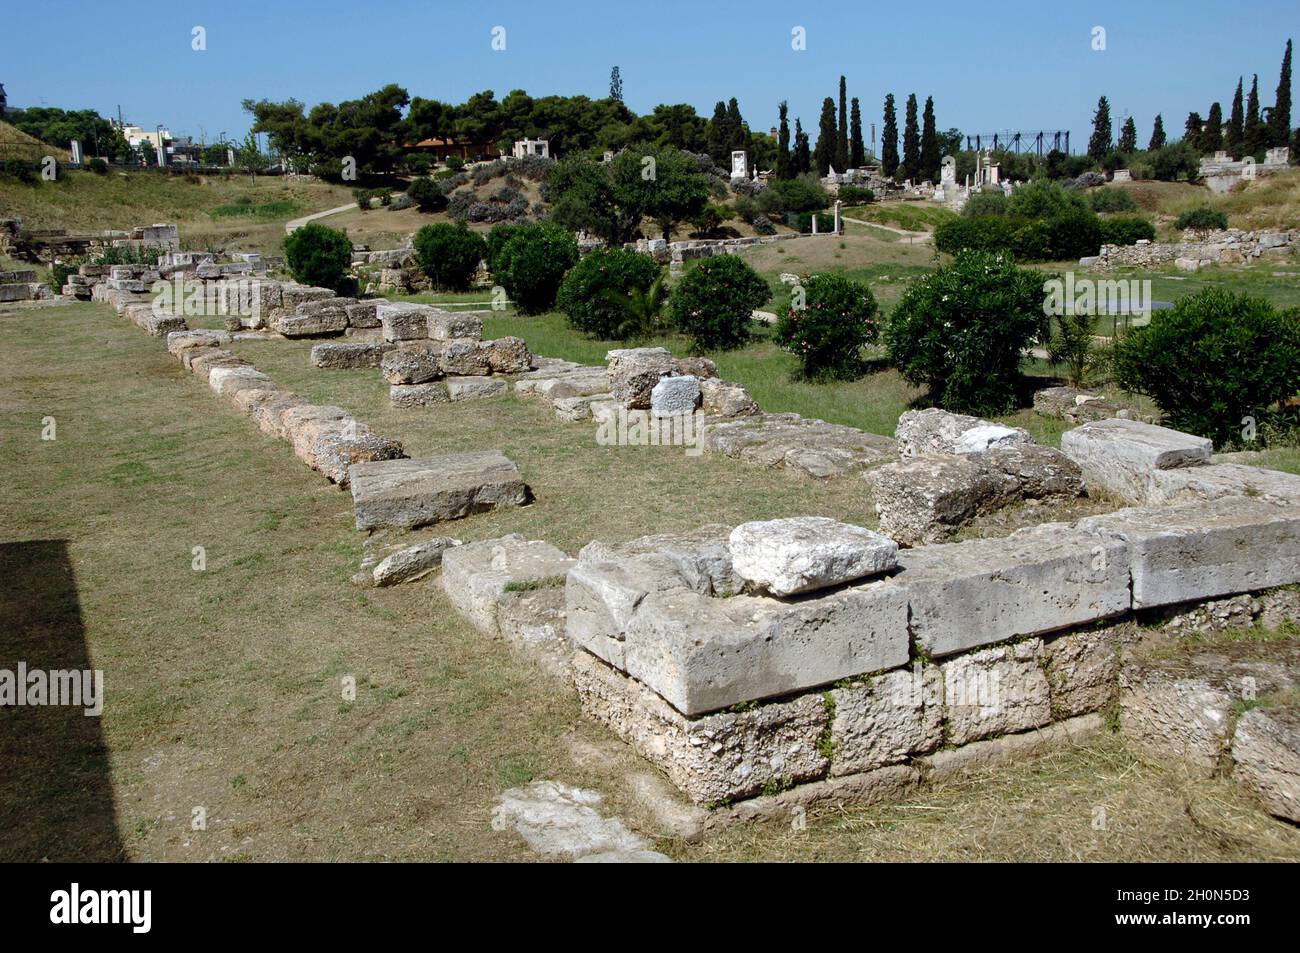 Greece, Athens. Area of Kerameikos (Ceramicus). Remains of the Dipylon Gate, the main gate in the city wall of Classical Athens. Stock Photo